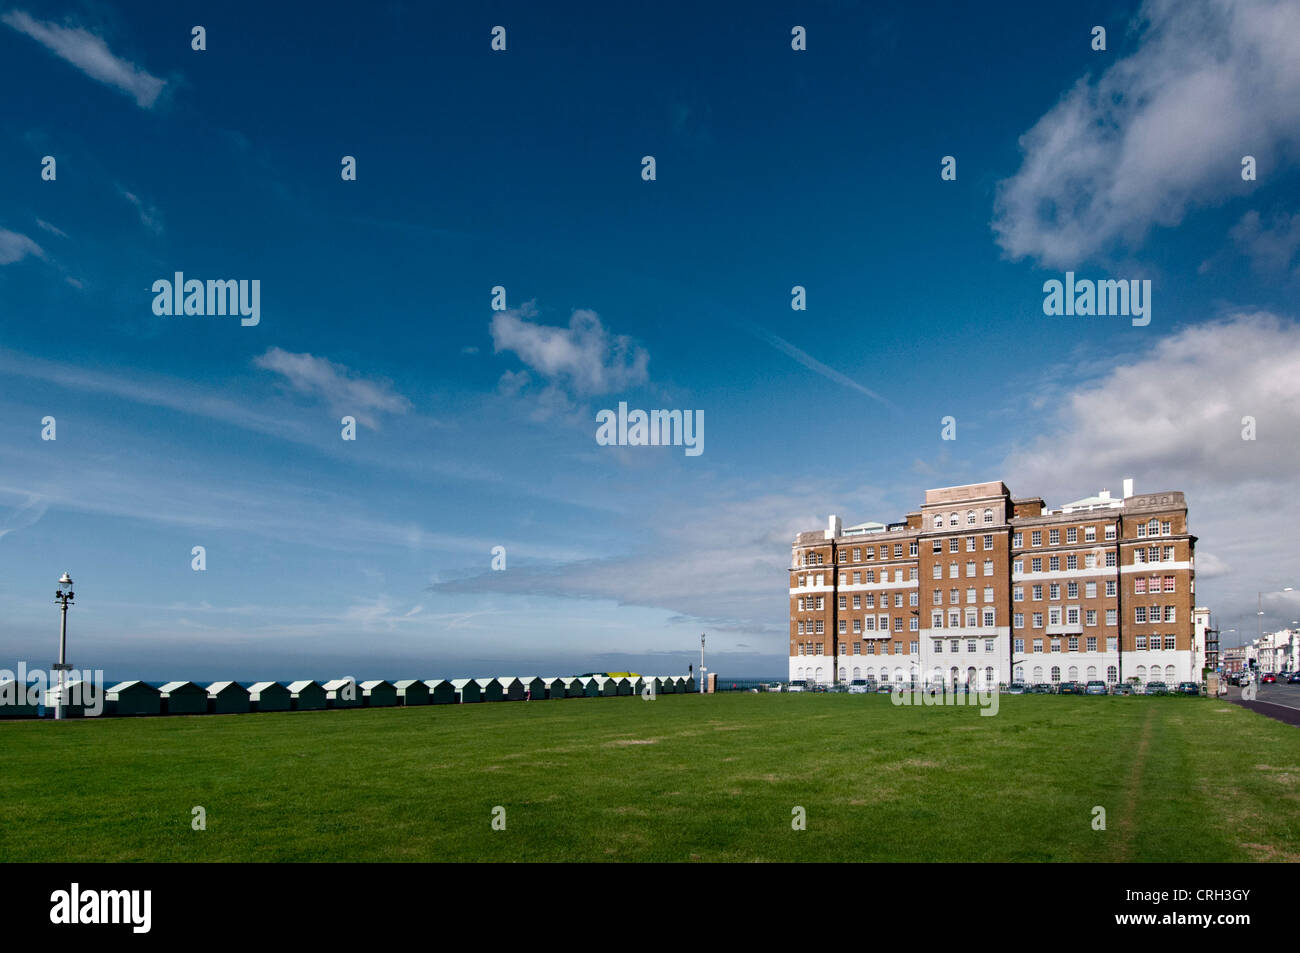 Hove Rasen in Hove, East Sussex. Stockfoto